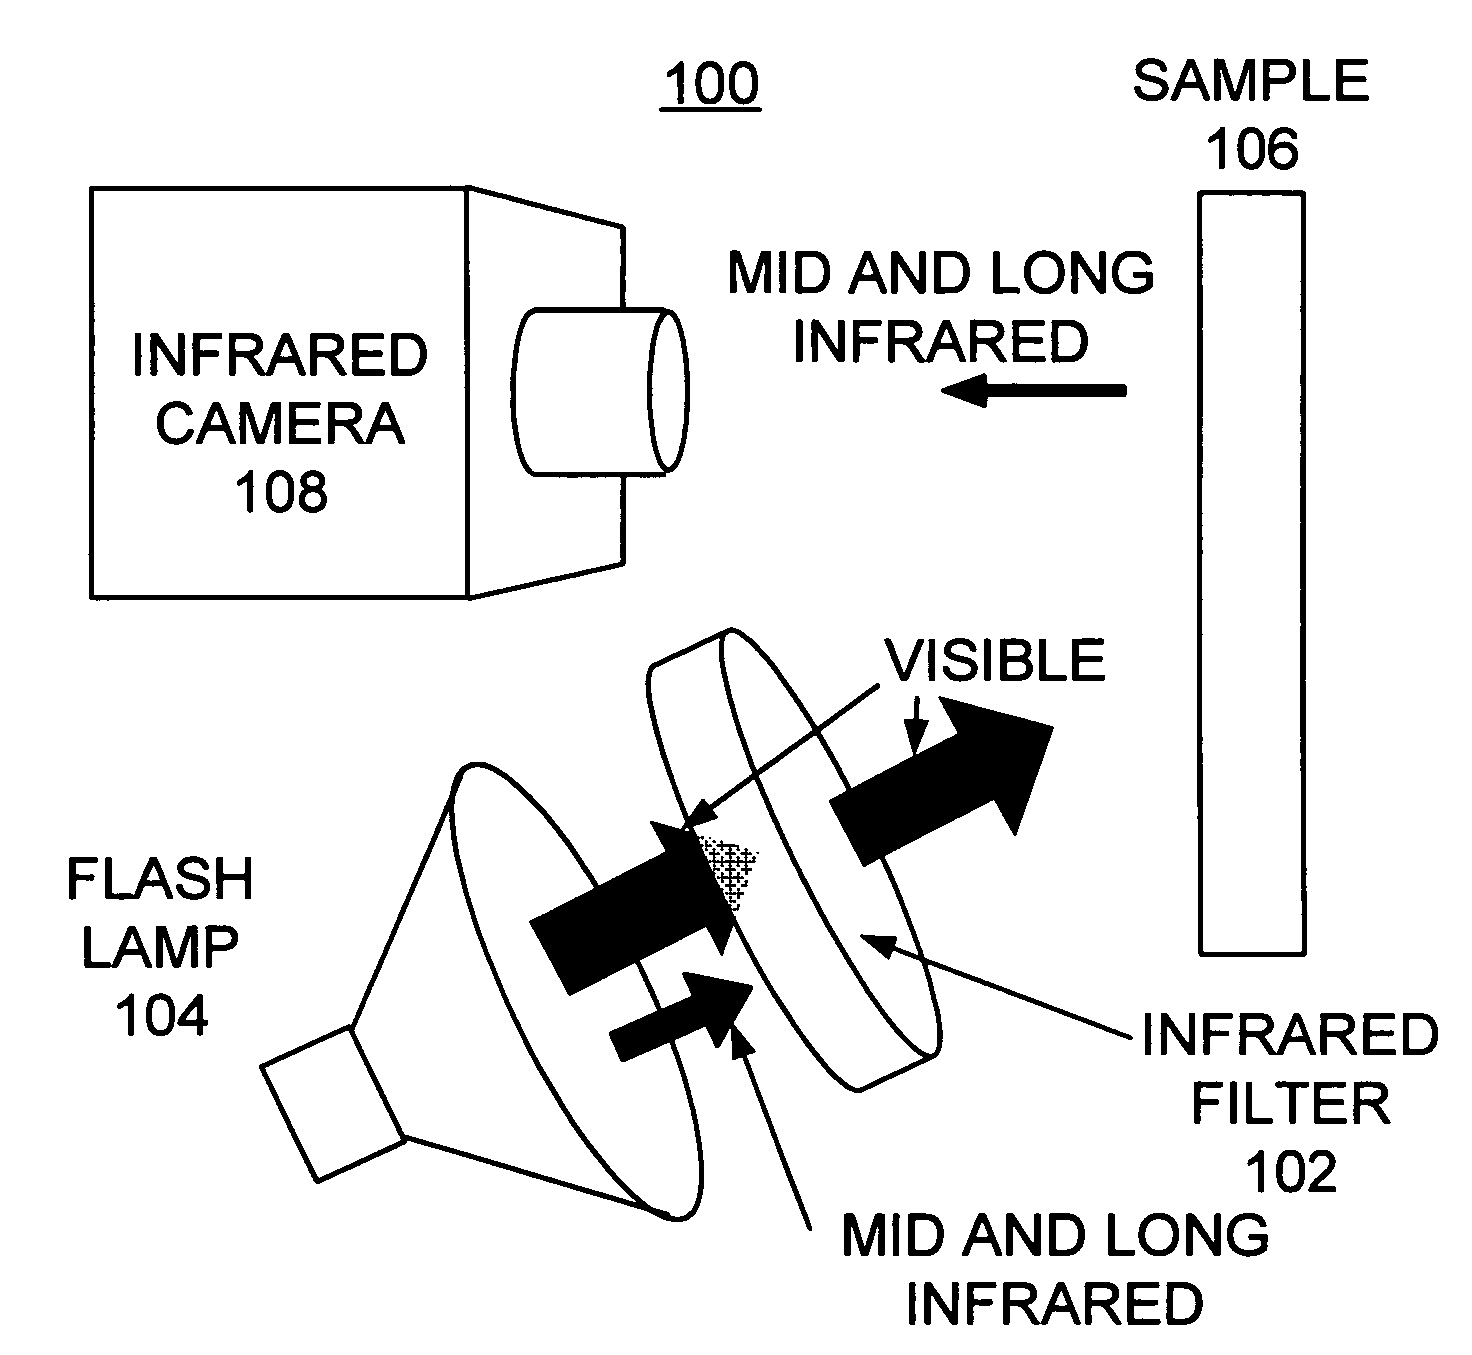 Optical filter for flash lamps in pulsed thermal imaging